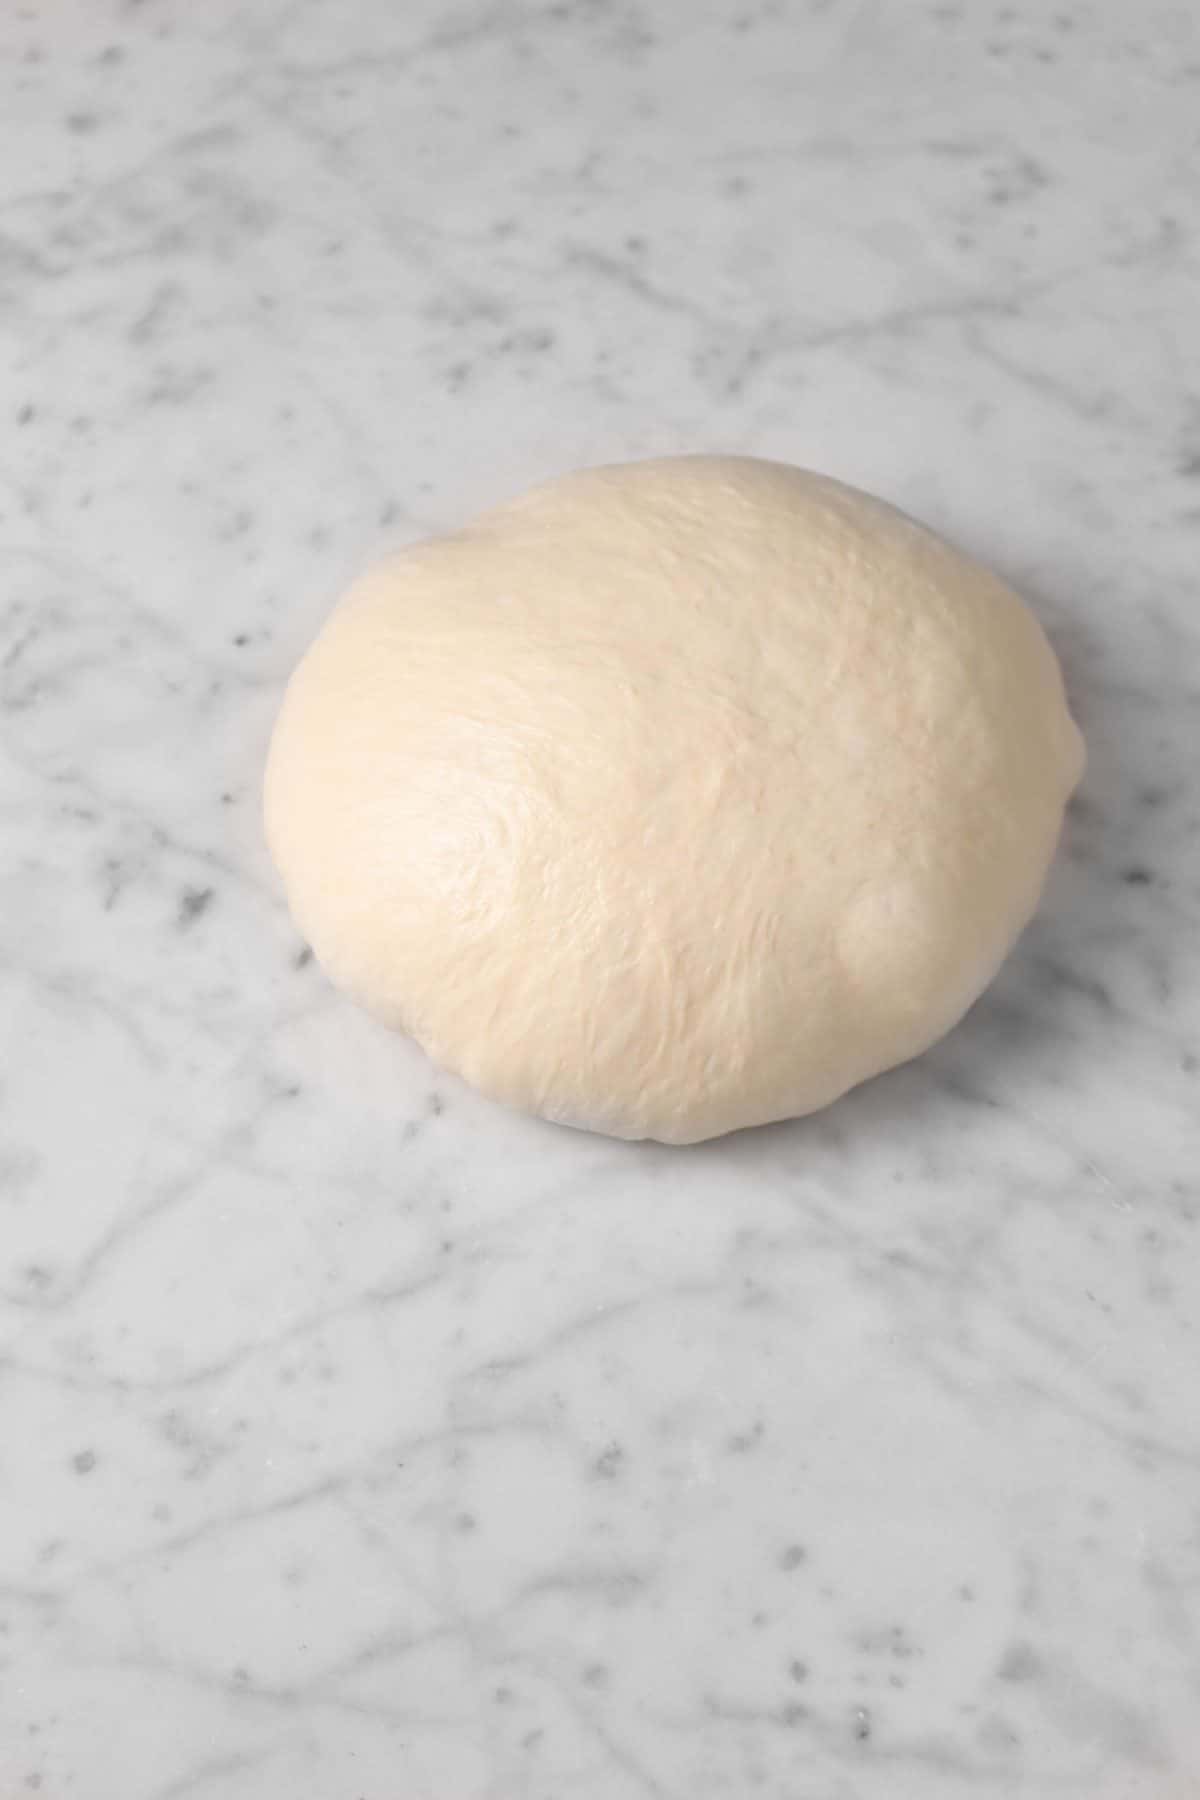 dough smoothened out in a small boule on a marble board